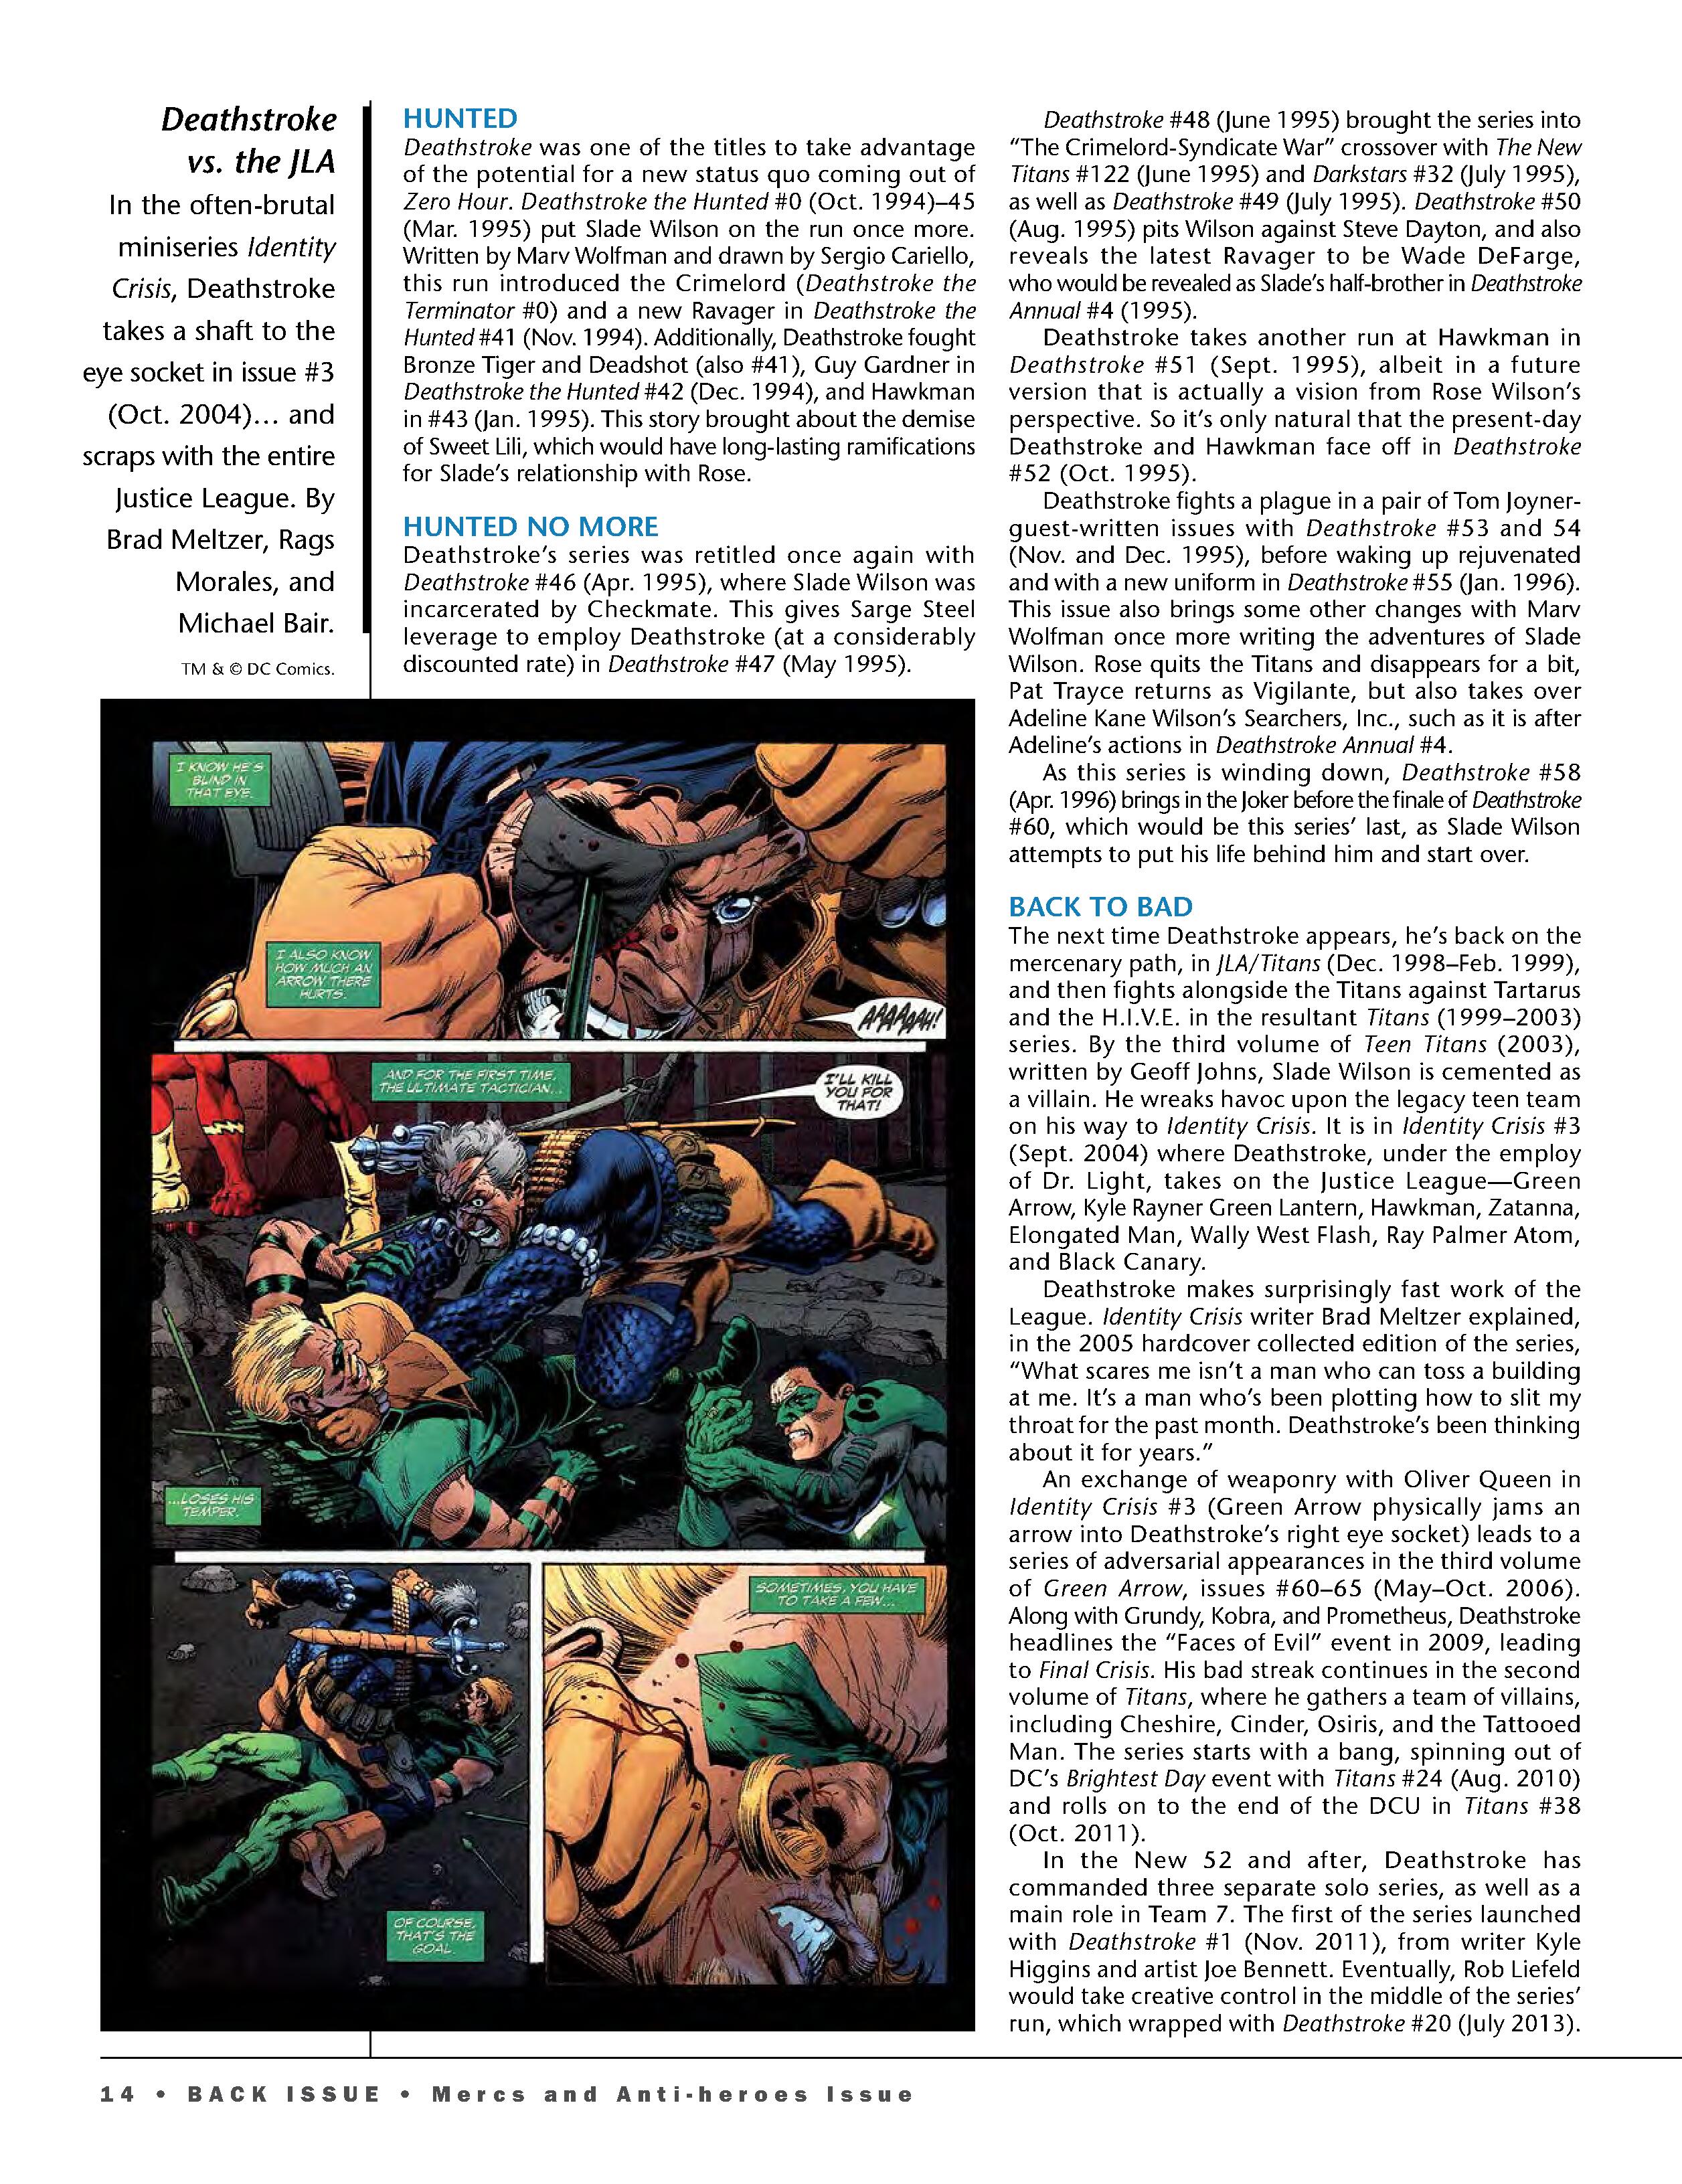 Read online Back Issue comic -  Issue #102 - 16